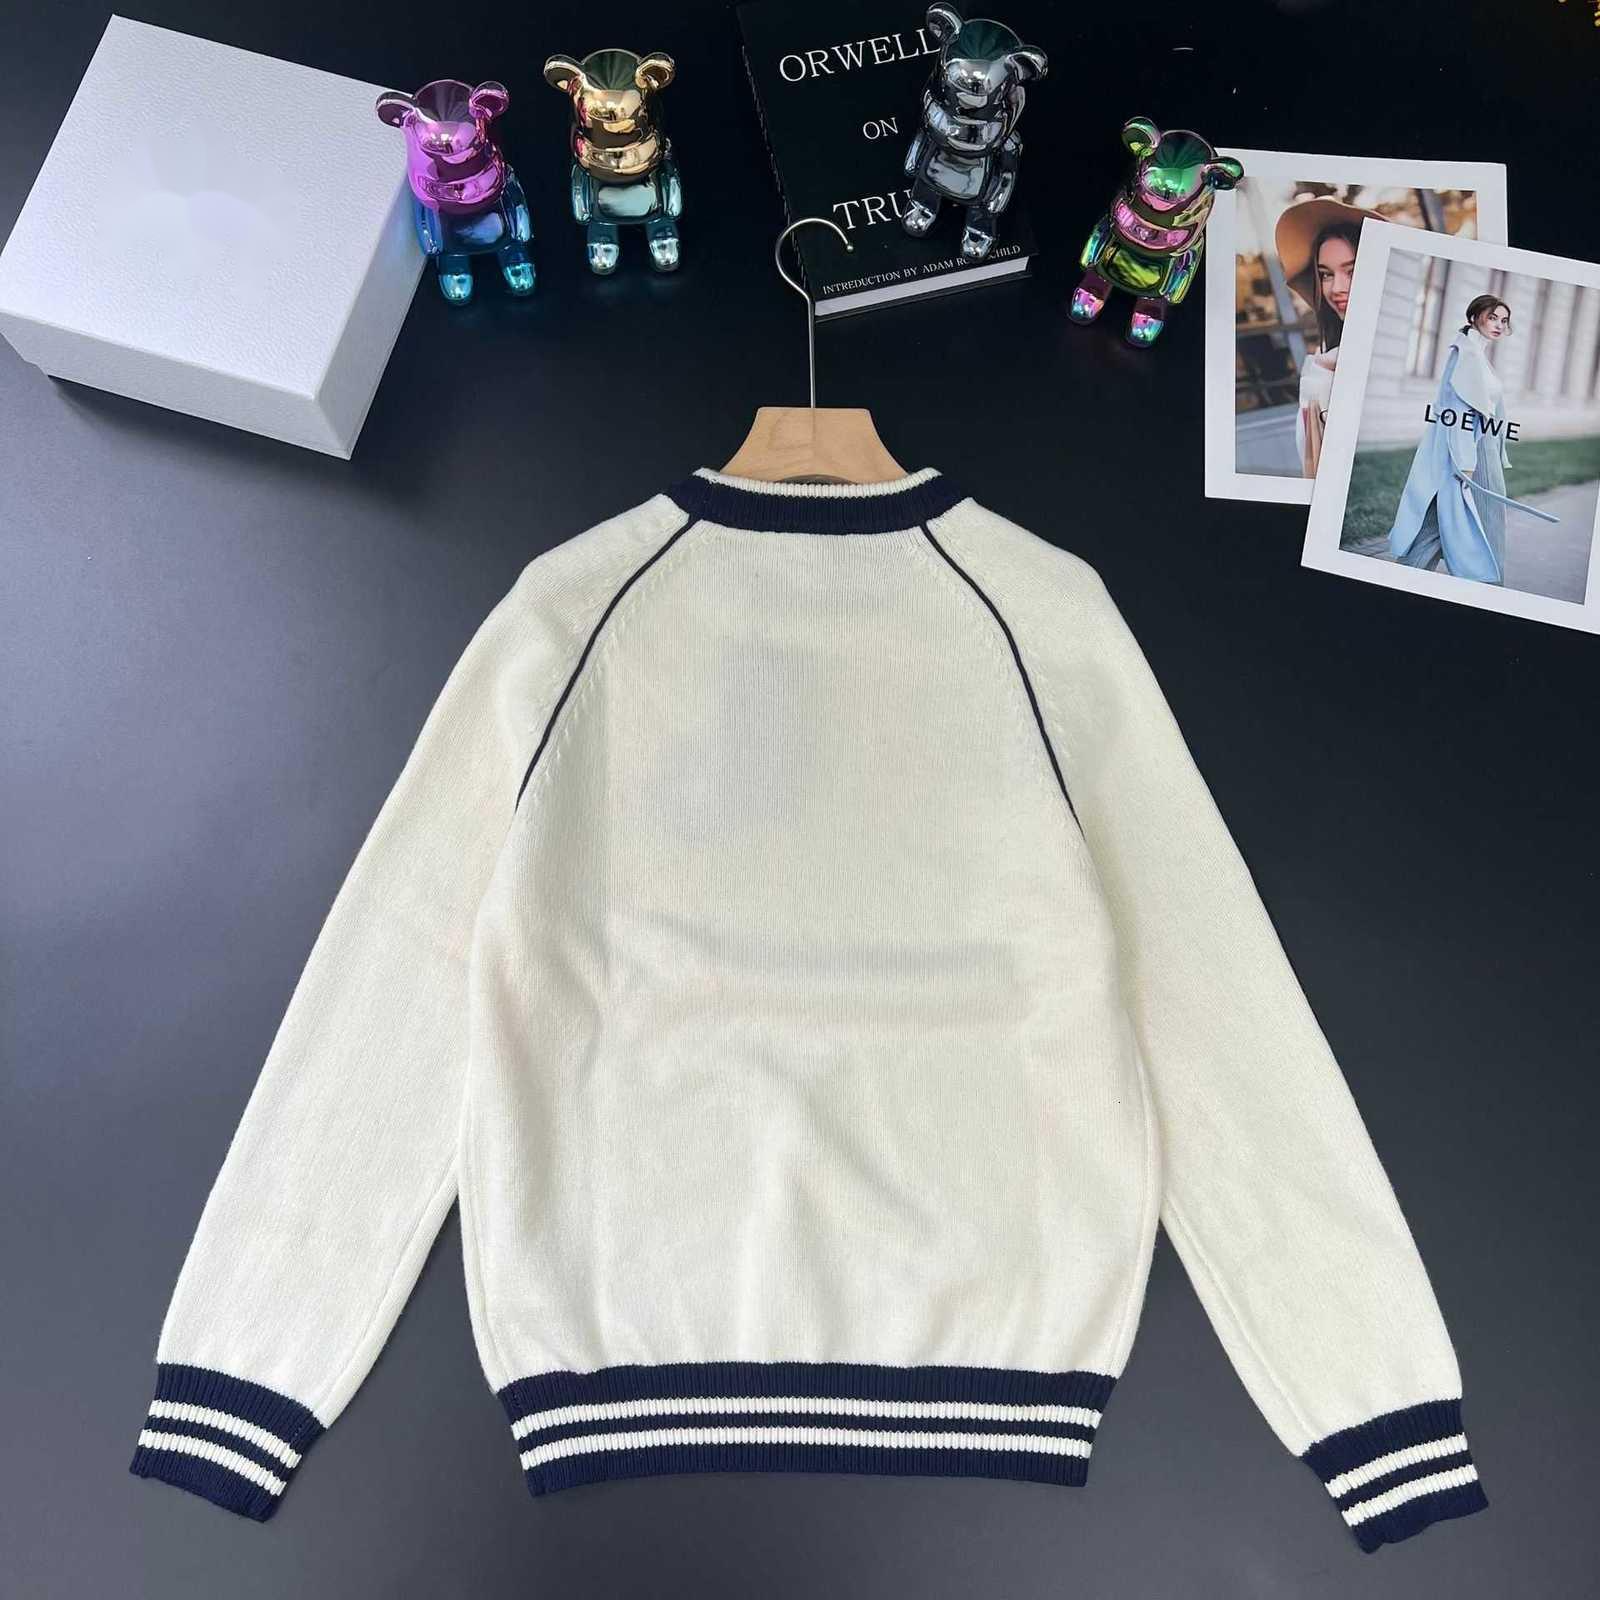 Women's T-Shirt Designer Gaoding Clothing G Family 23 Autumn/Winter New Product Contrast Round Neck Knitwear Long Sleeve Overlay Top Coat D9GJ